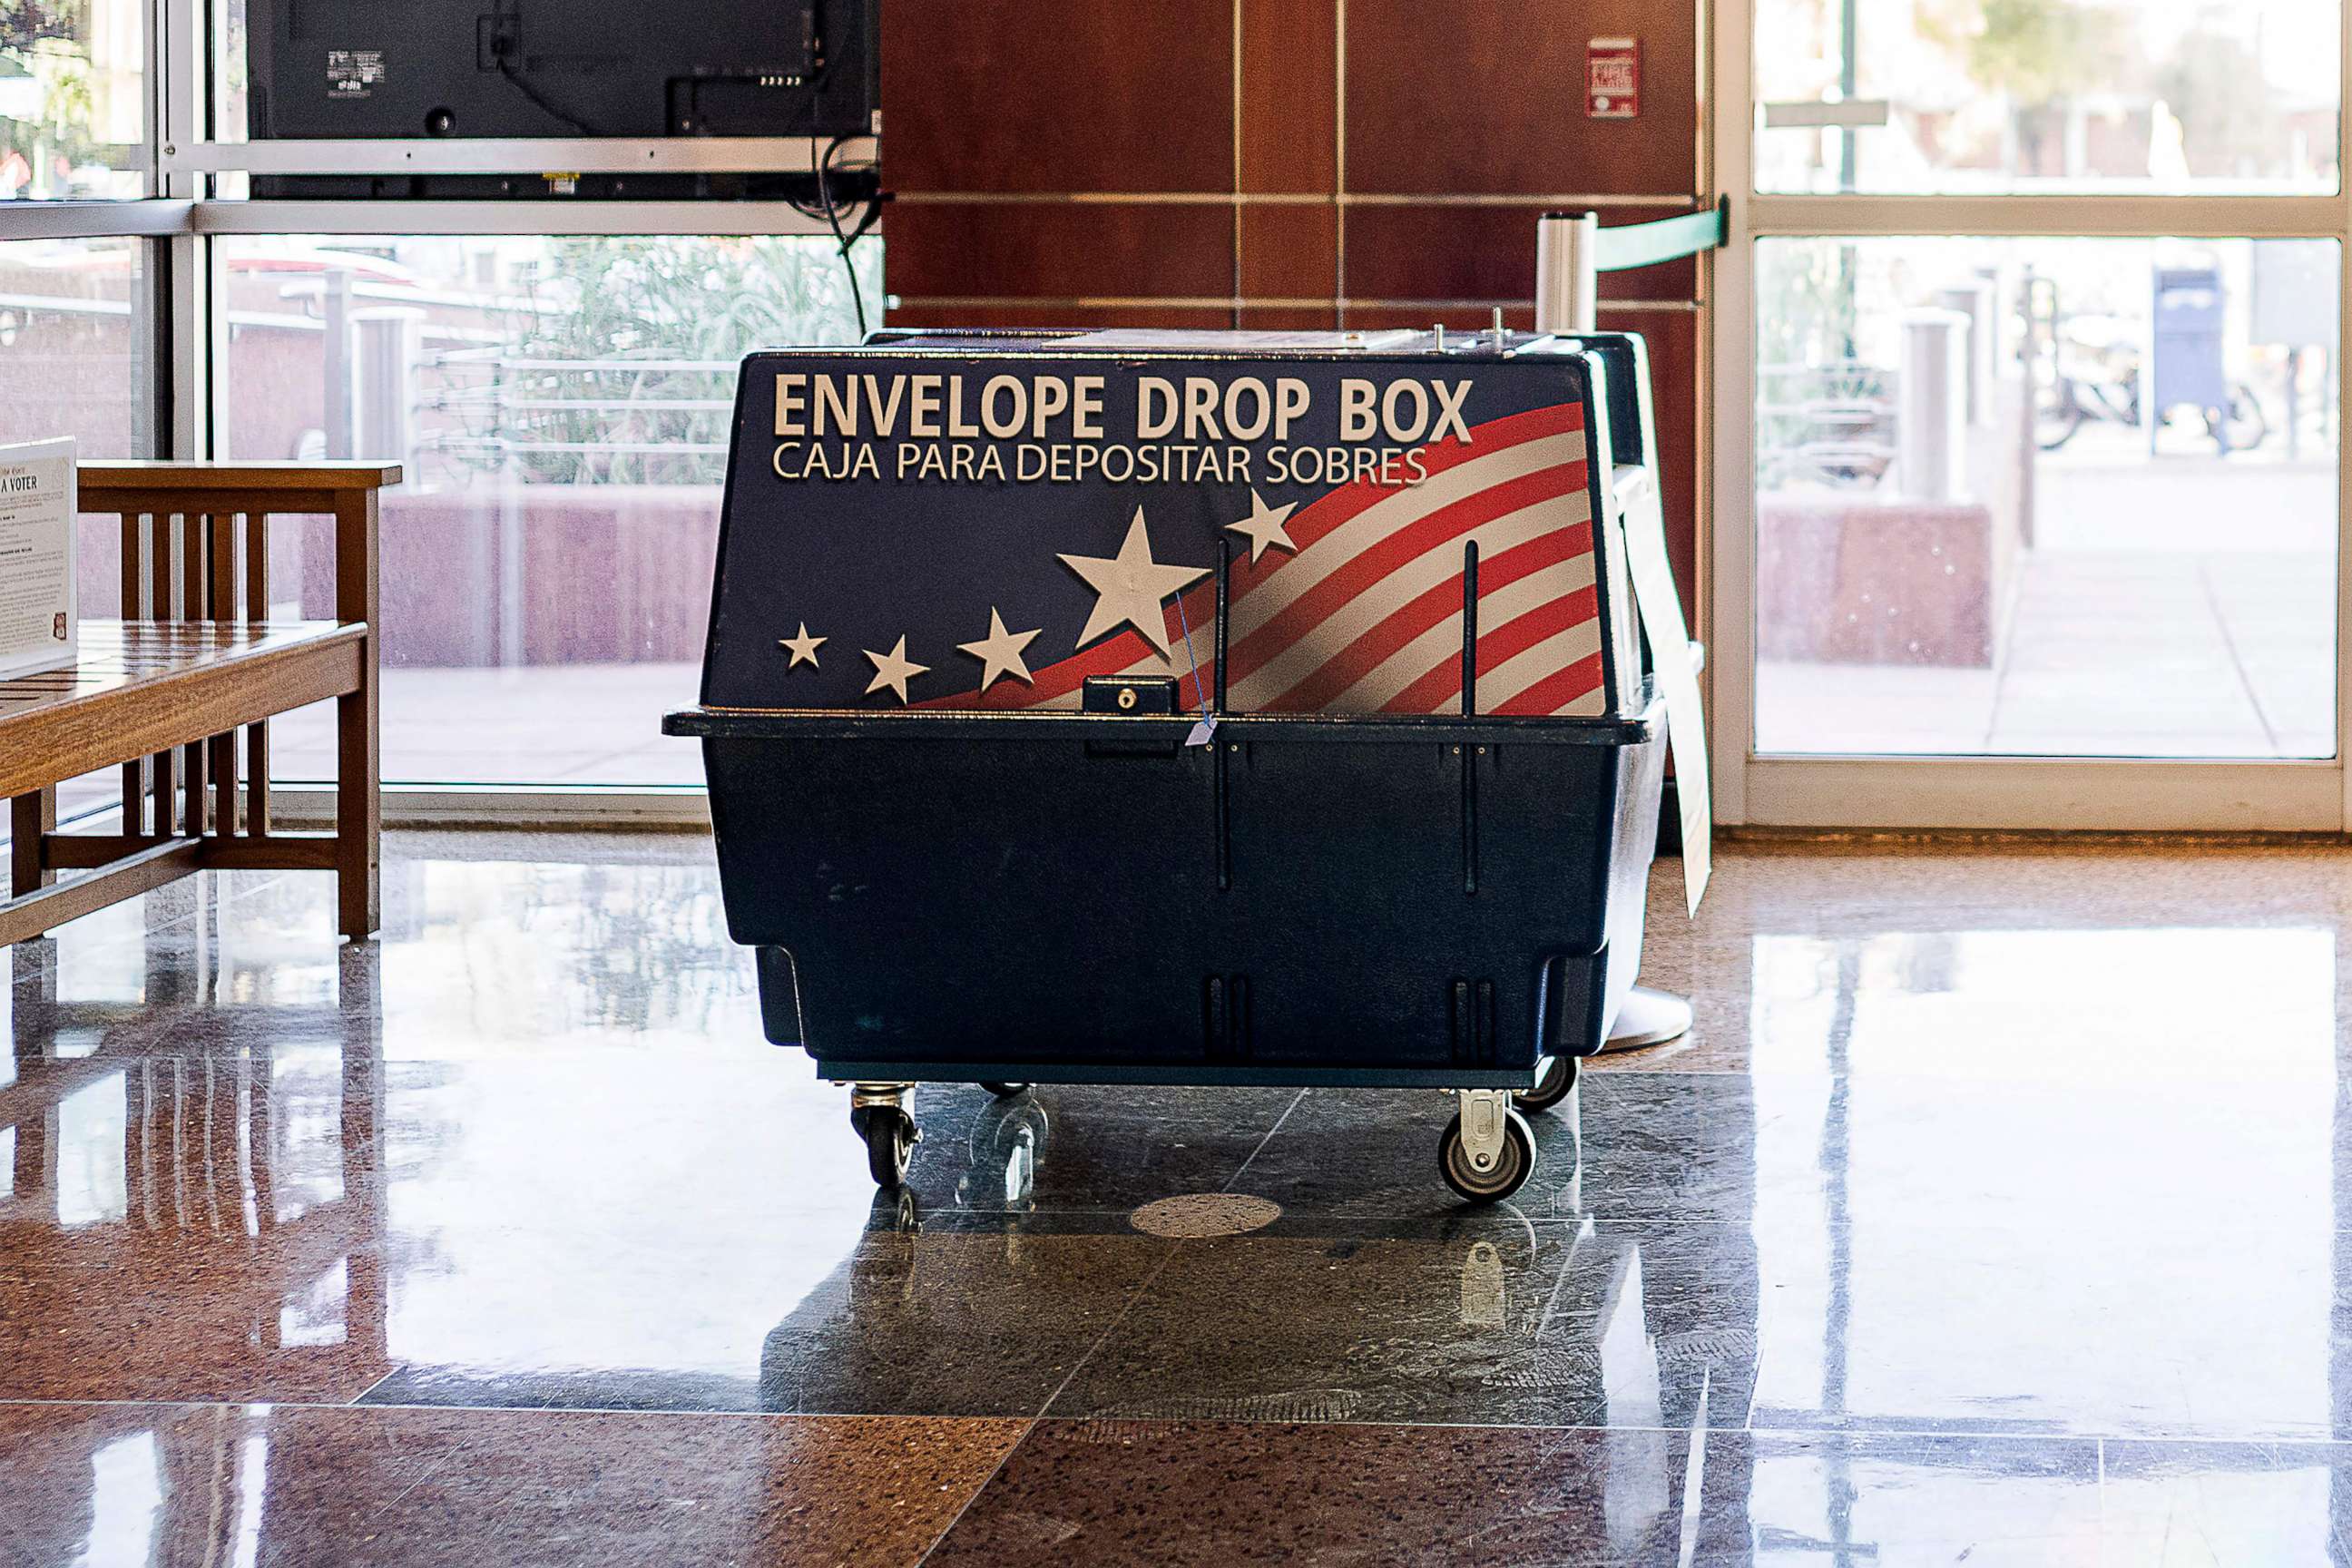 PHOTO: A dropbox is pictured ahead of the midterm elections at the City Hall in Mesa, Arizona, on October 25, 2022.